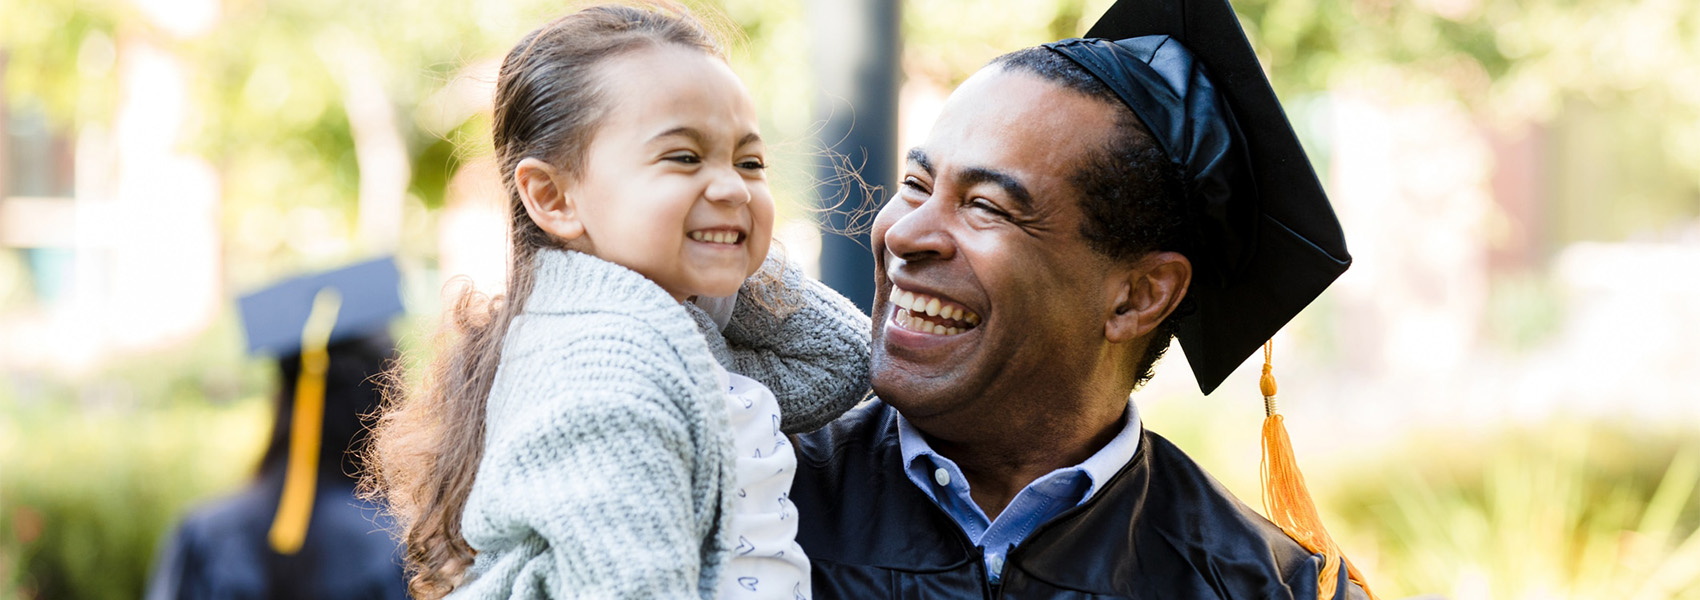 A smiling man in a cap and gown holding a little girl in his arms